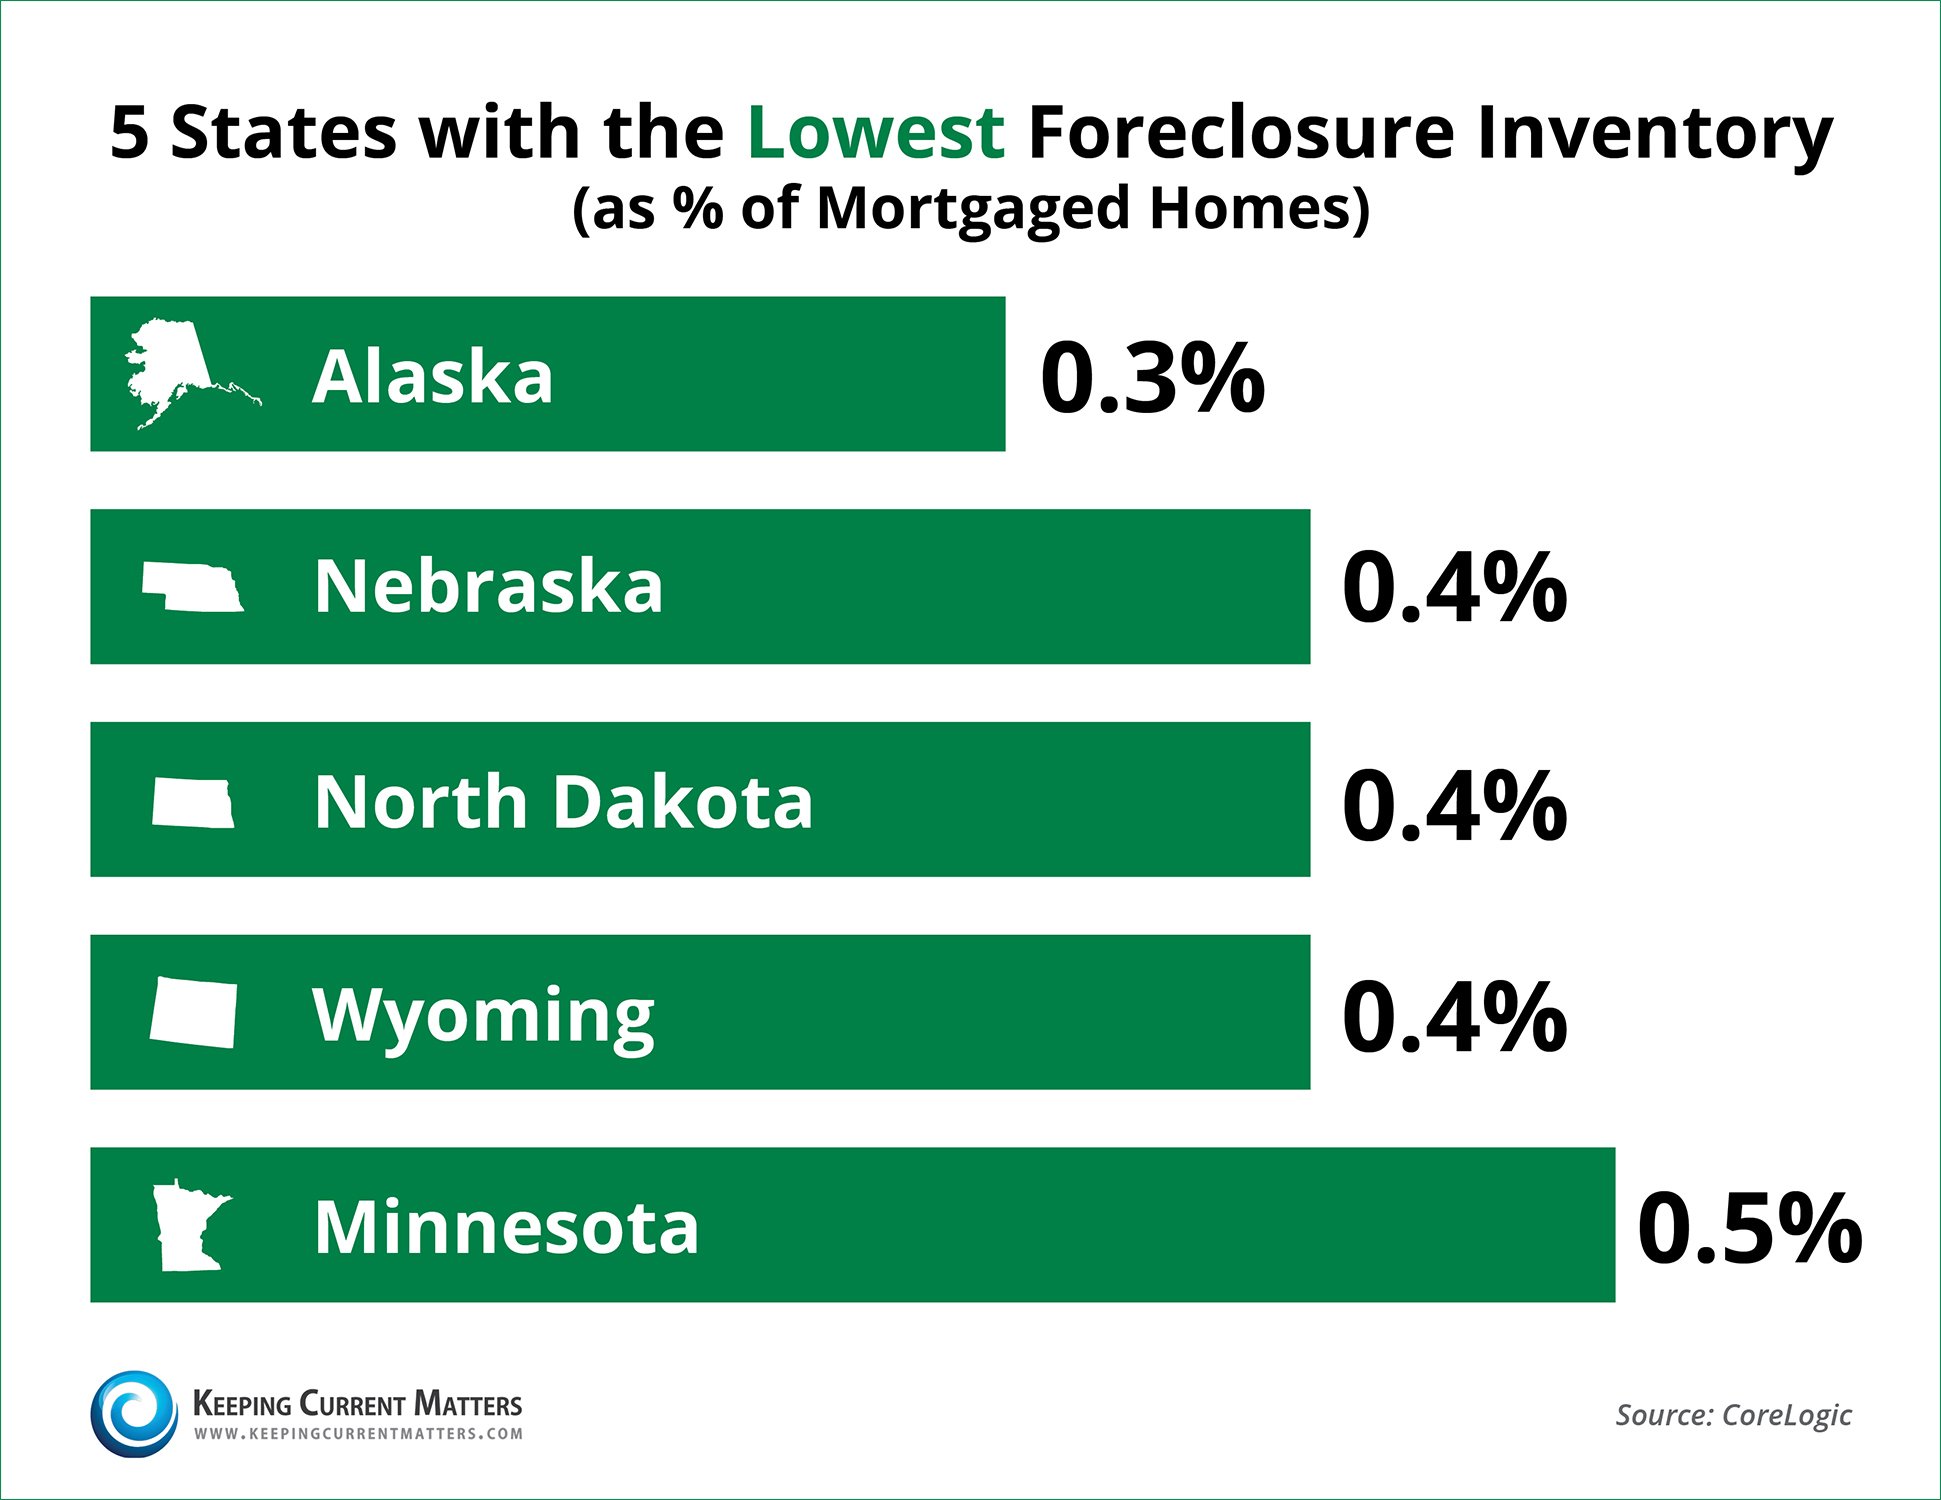 CoreLogic Foreclosure Report Lowest 5 States | Keeping Current Matters